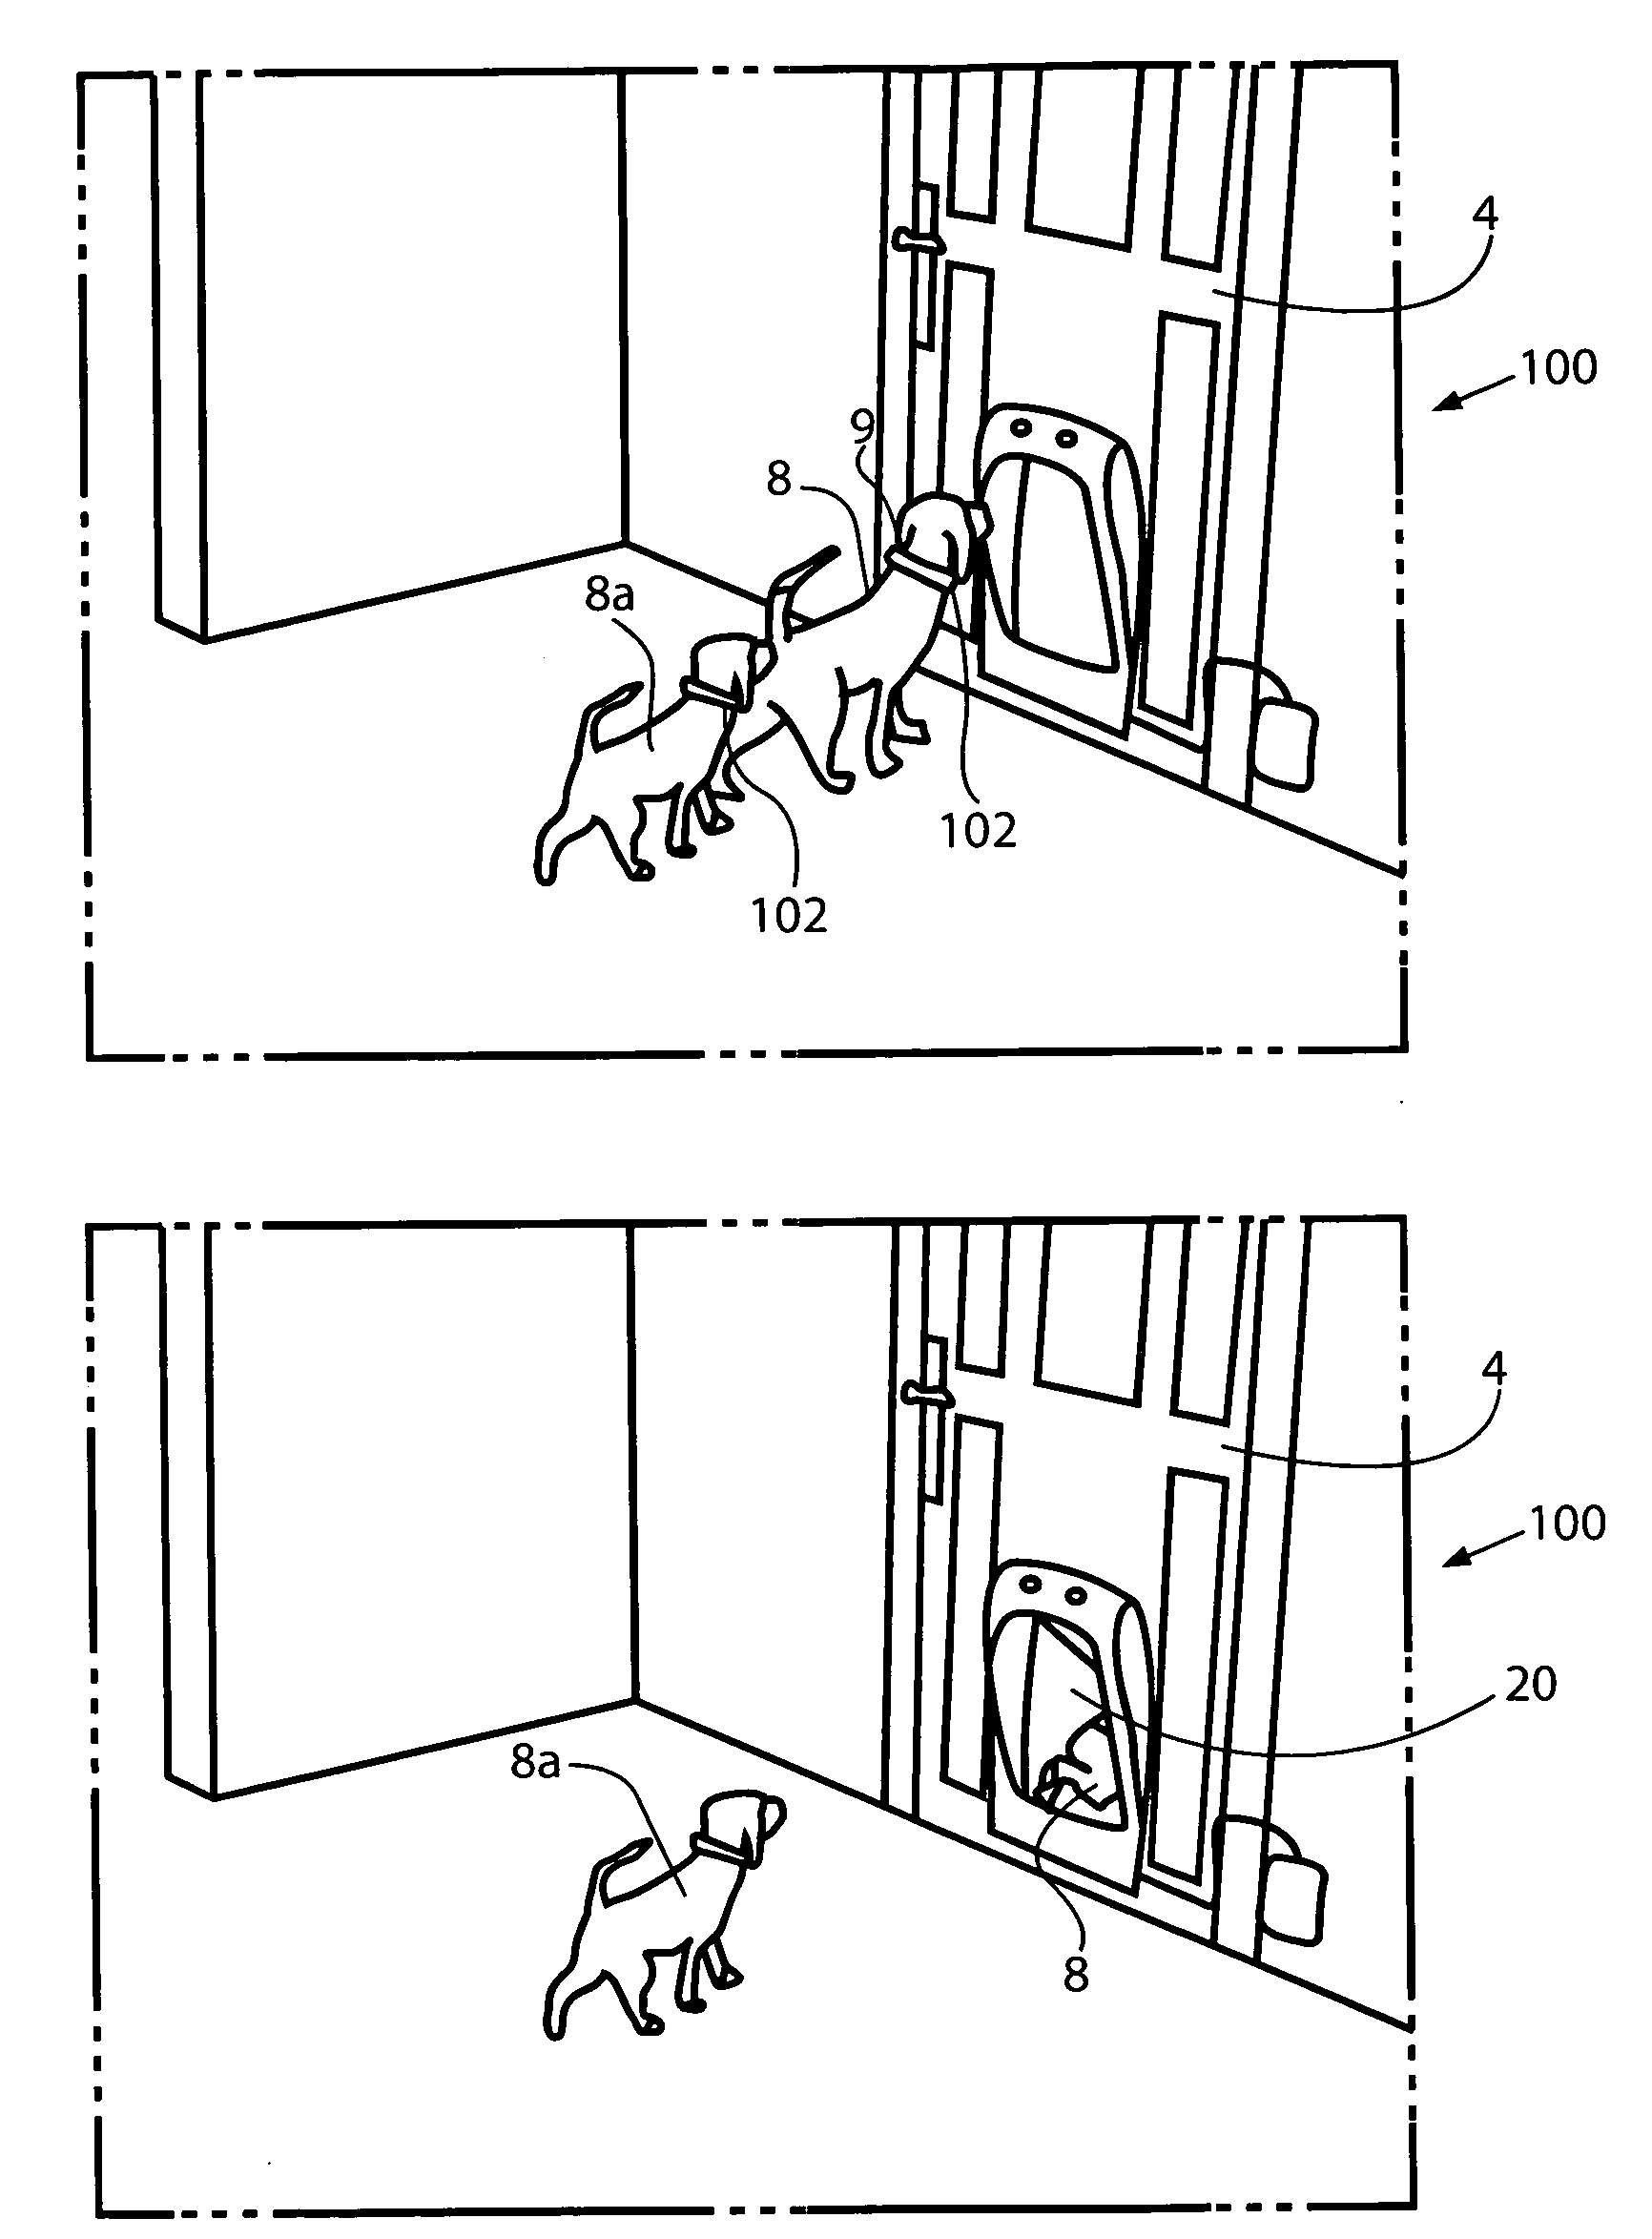 System and method for controlling animal's egress from a secure enclosure